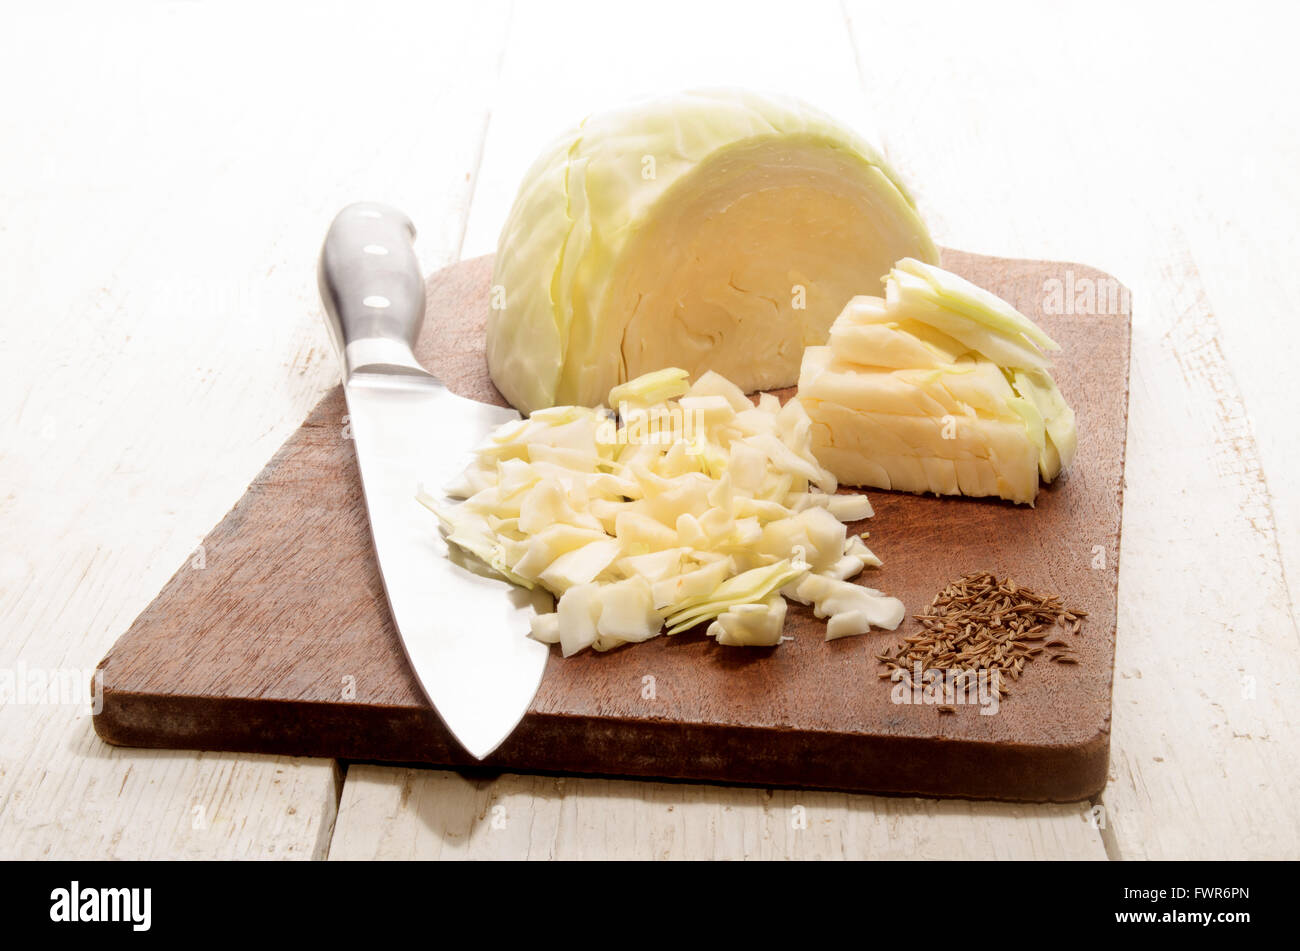 chopped white cabbage and caraway seed on wooden board Stock Photo